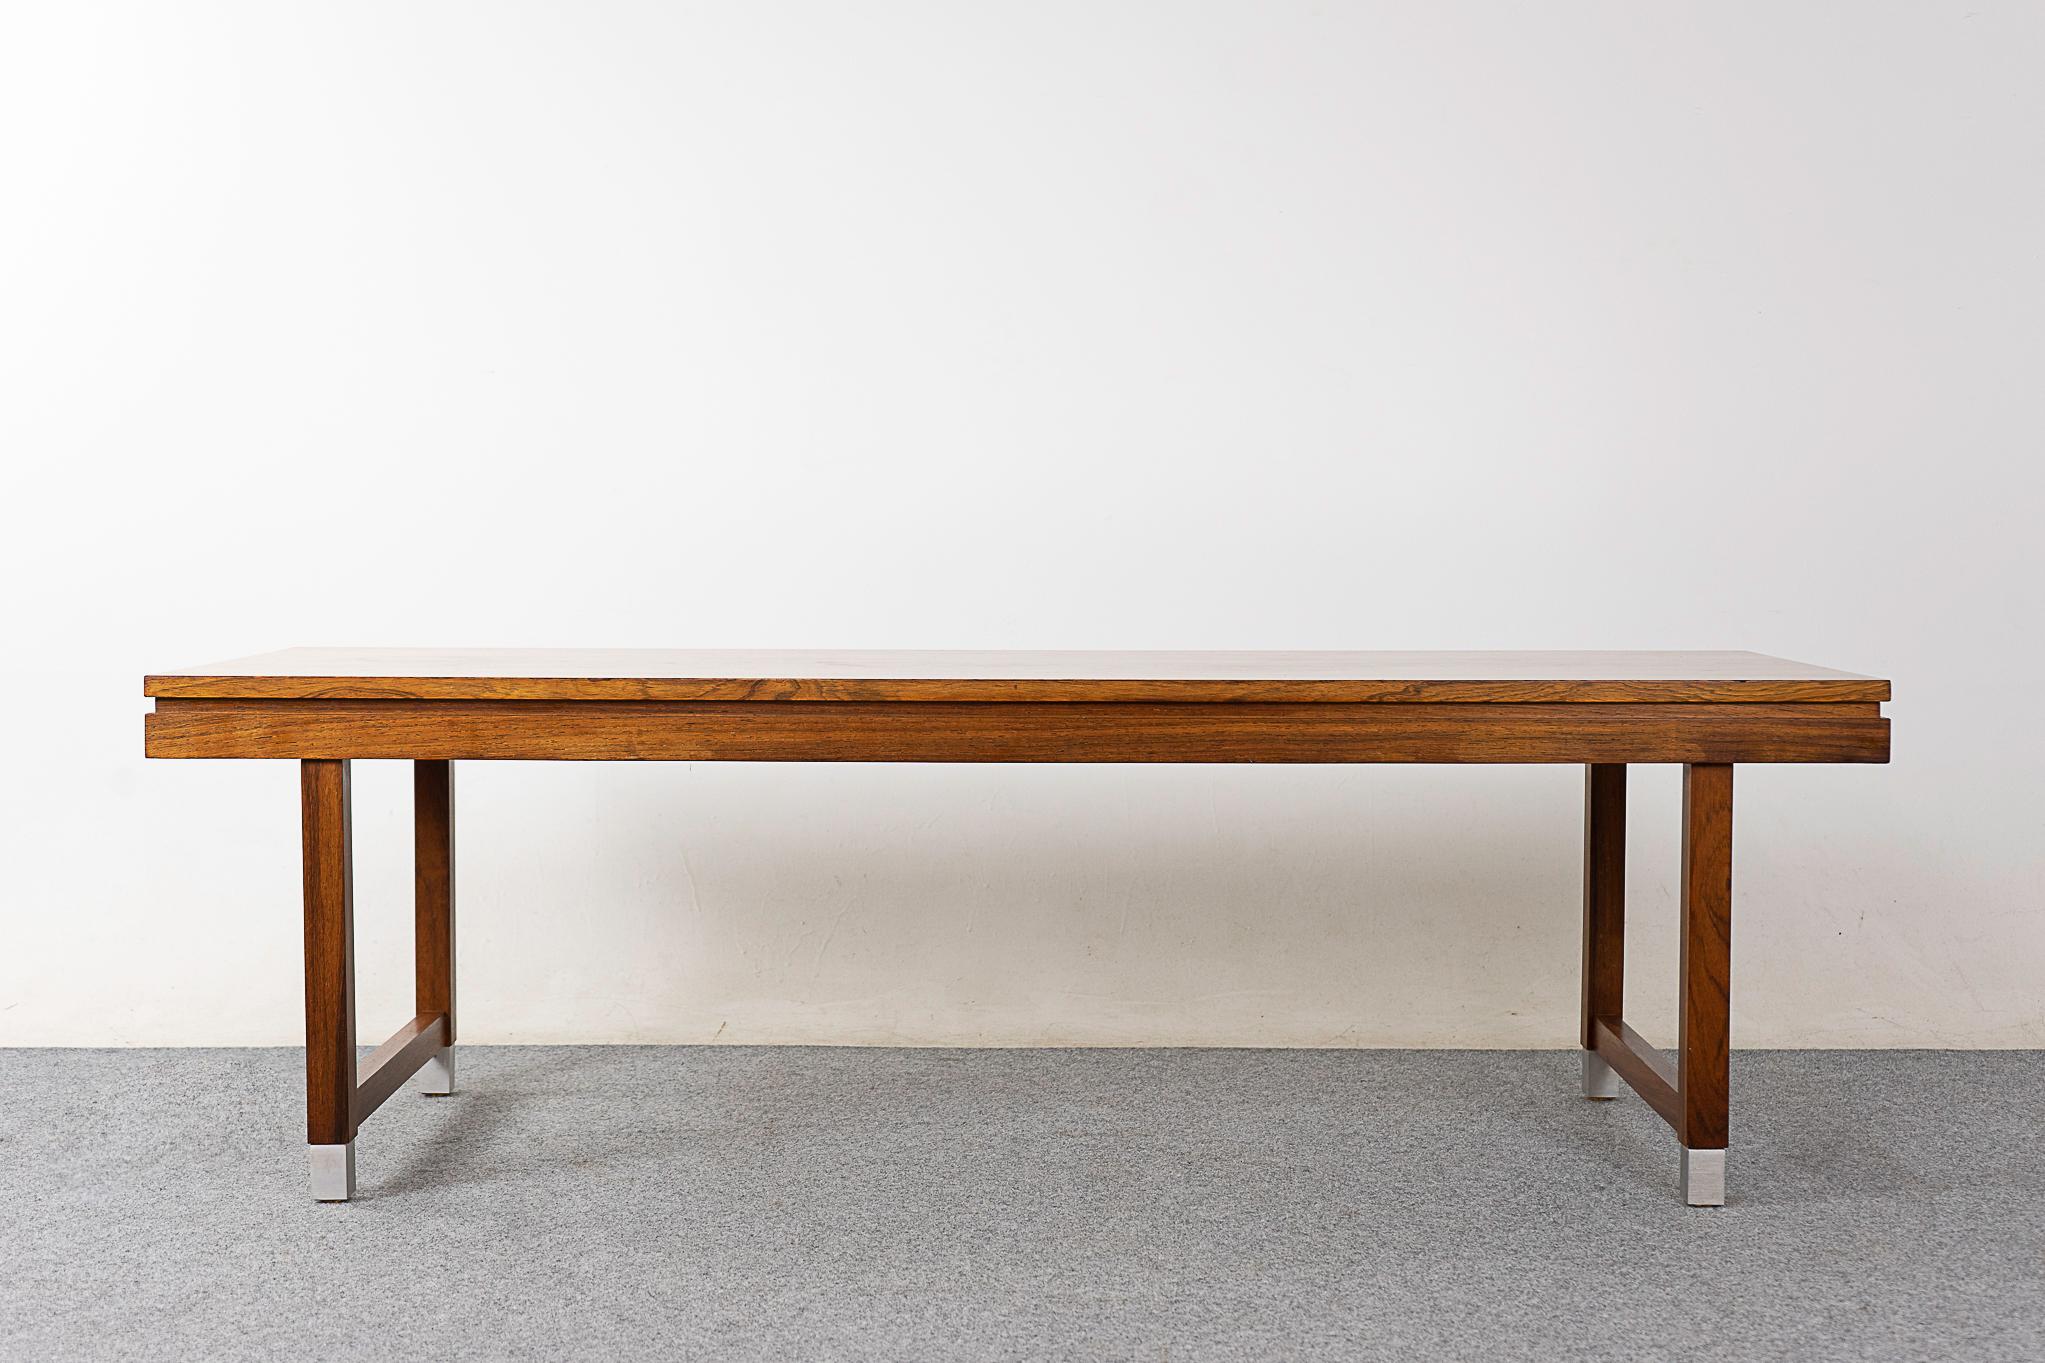 Rosewood and metal mid-century coffee table, circa 1960's. Book matched veneer and solid wood trim. Sleek edges with recessed detail and metal feet.

Unrestored item with option to purchase in restored condition for an additional $200 USD.